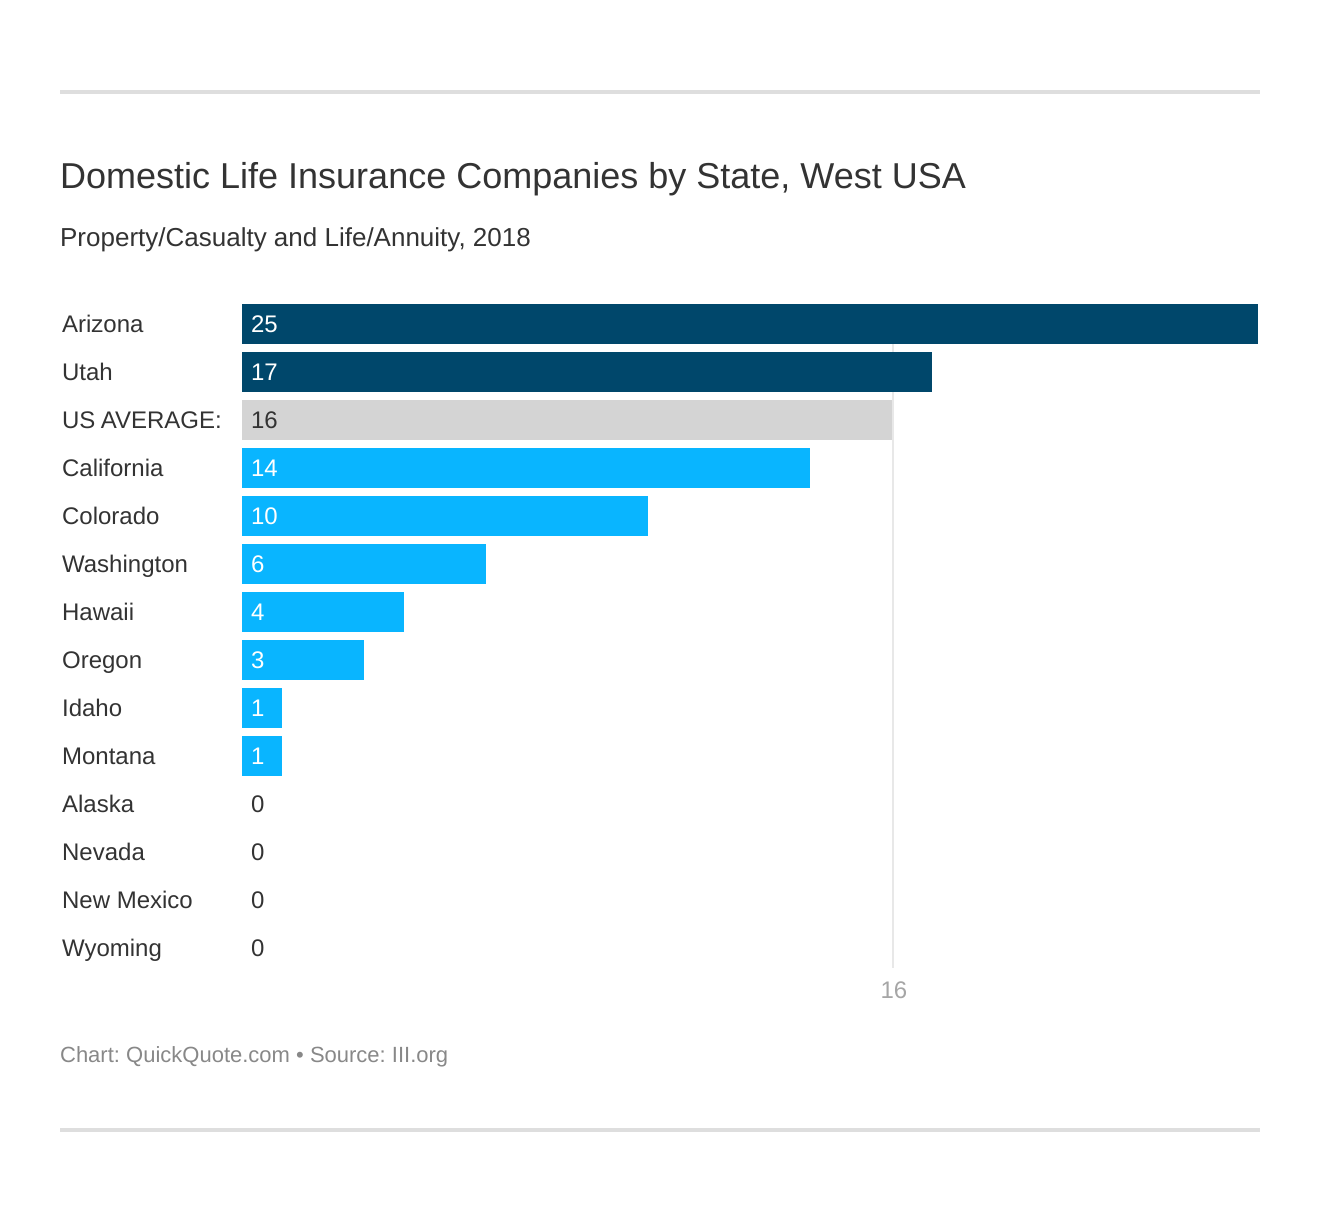 Domestic Life Insurance Companies by State, West USA